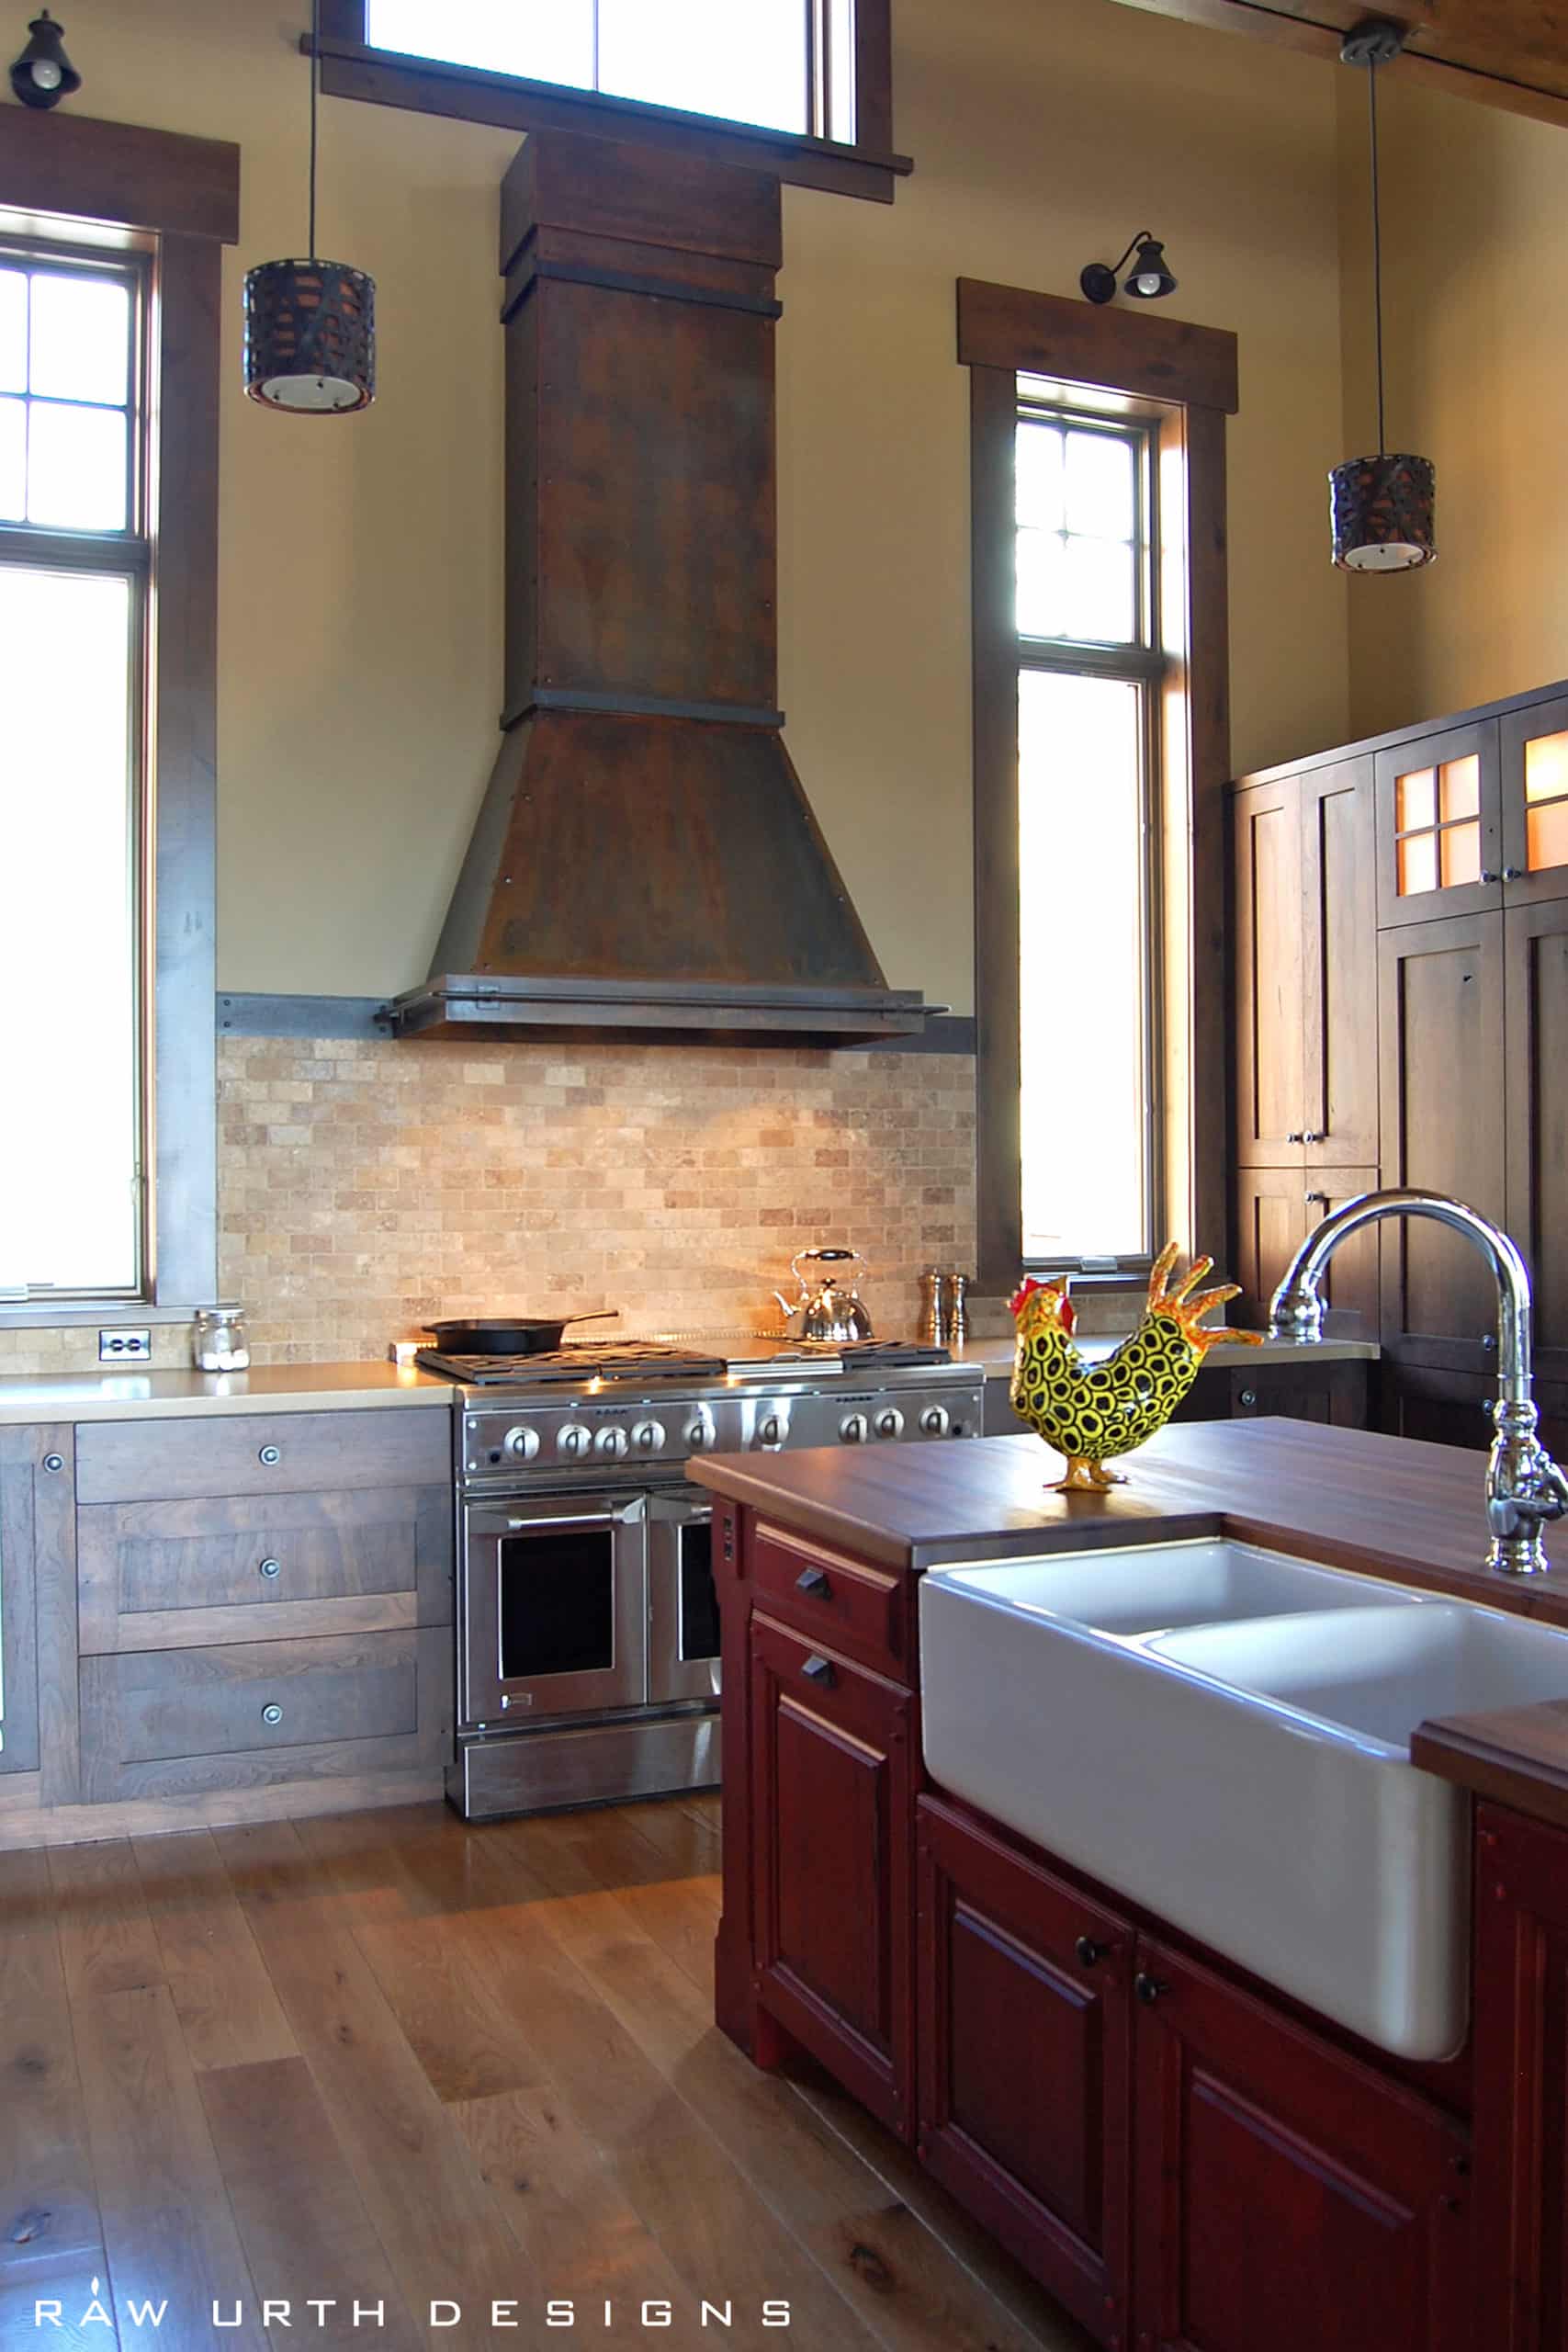 Sanctuary Design features our rustic Breckenridge range hood for high ceilings in Rustic Iron finish.